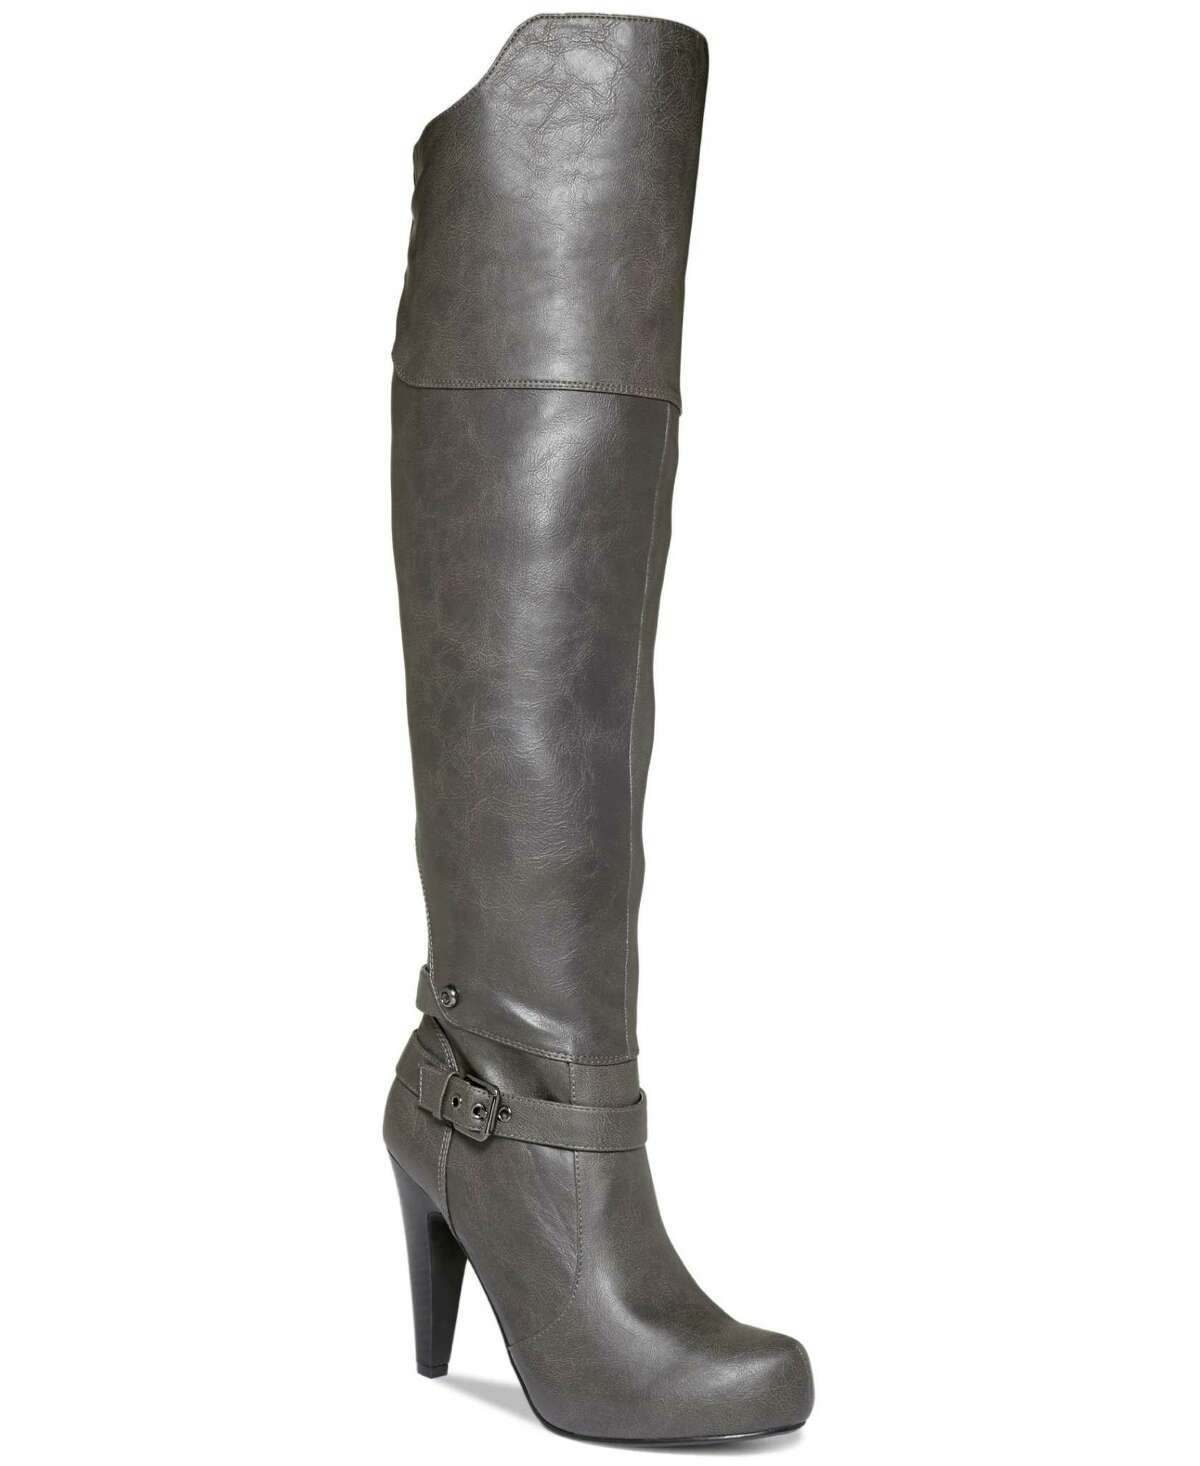 boots; G by GUESS Women's Trinna Over-the-Knee Platform Dress Boots $119.00 at Macy's